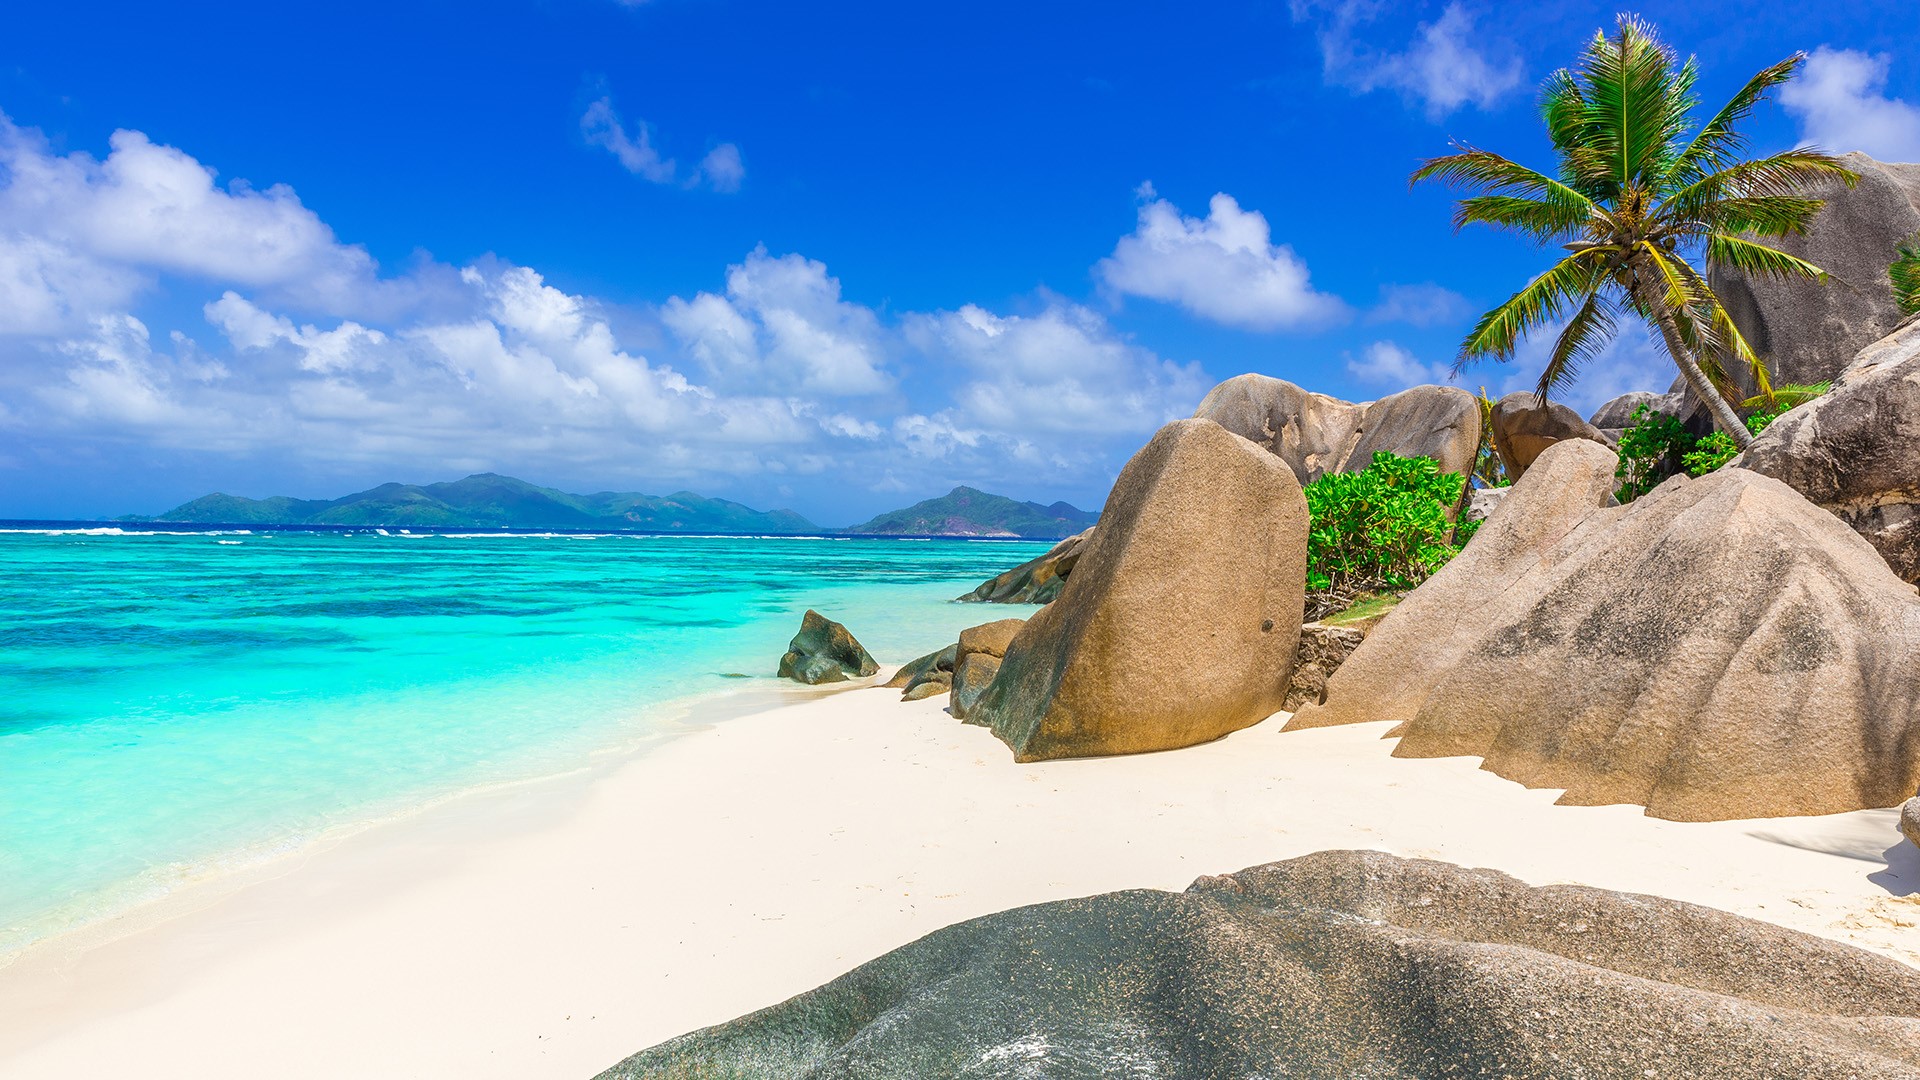 Nature Landscape Mountains Clouds Sky Beach Rocks Sand Water Clear Water Trees Seychelles 1920x1080